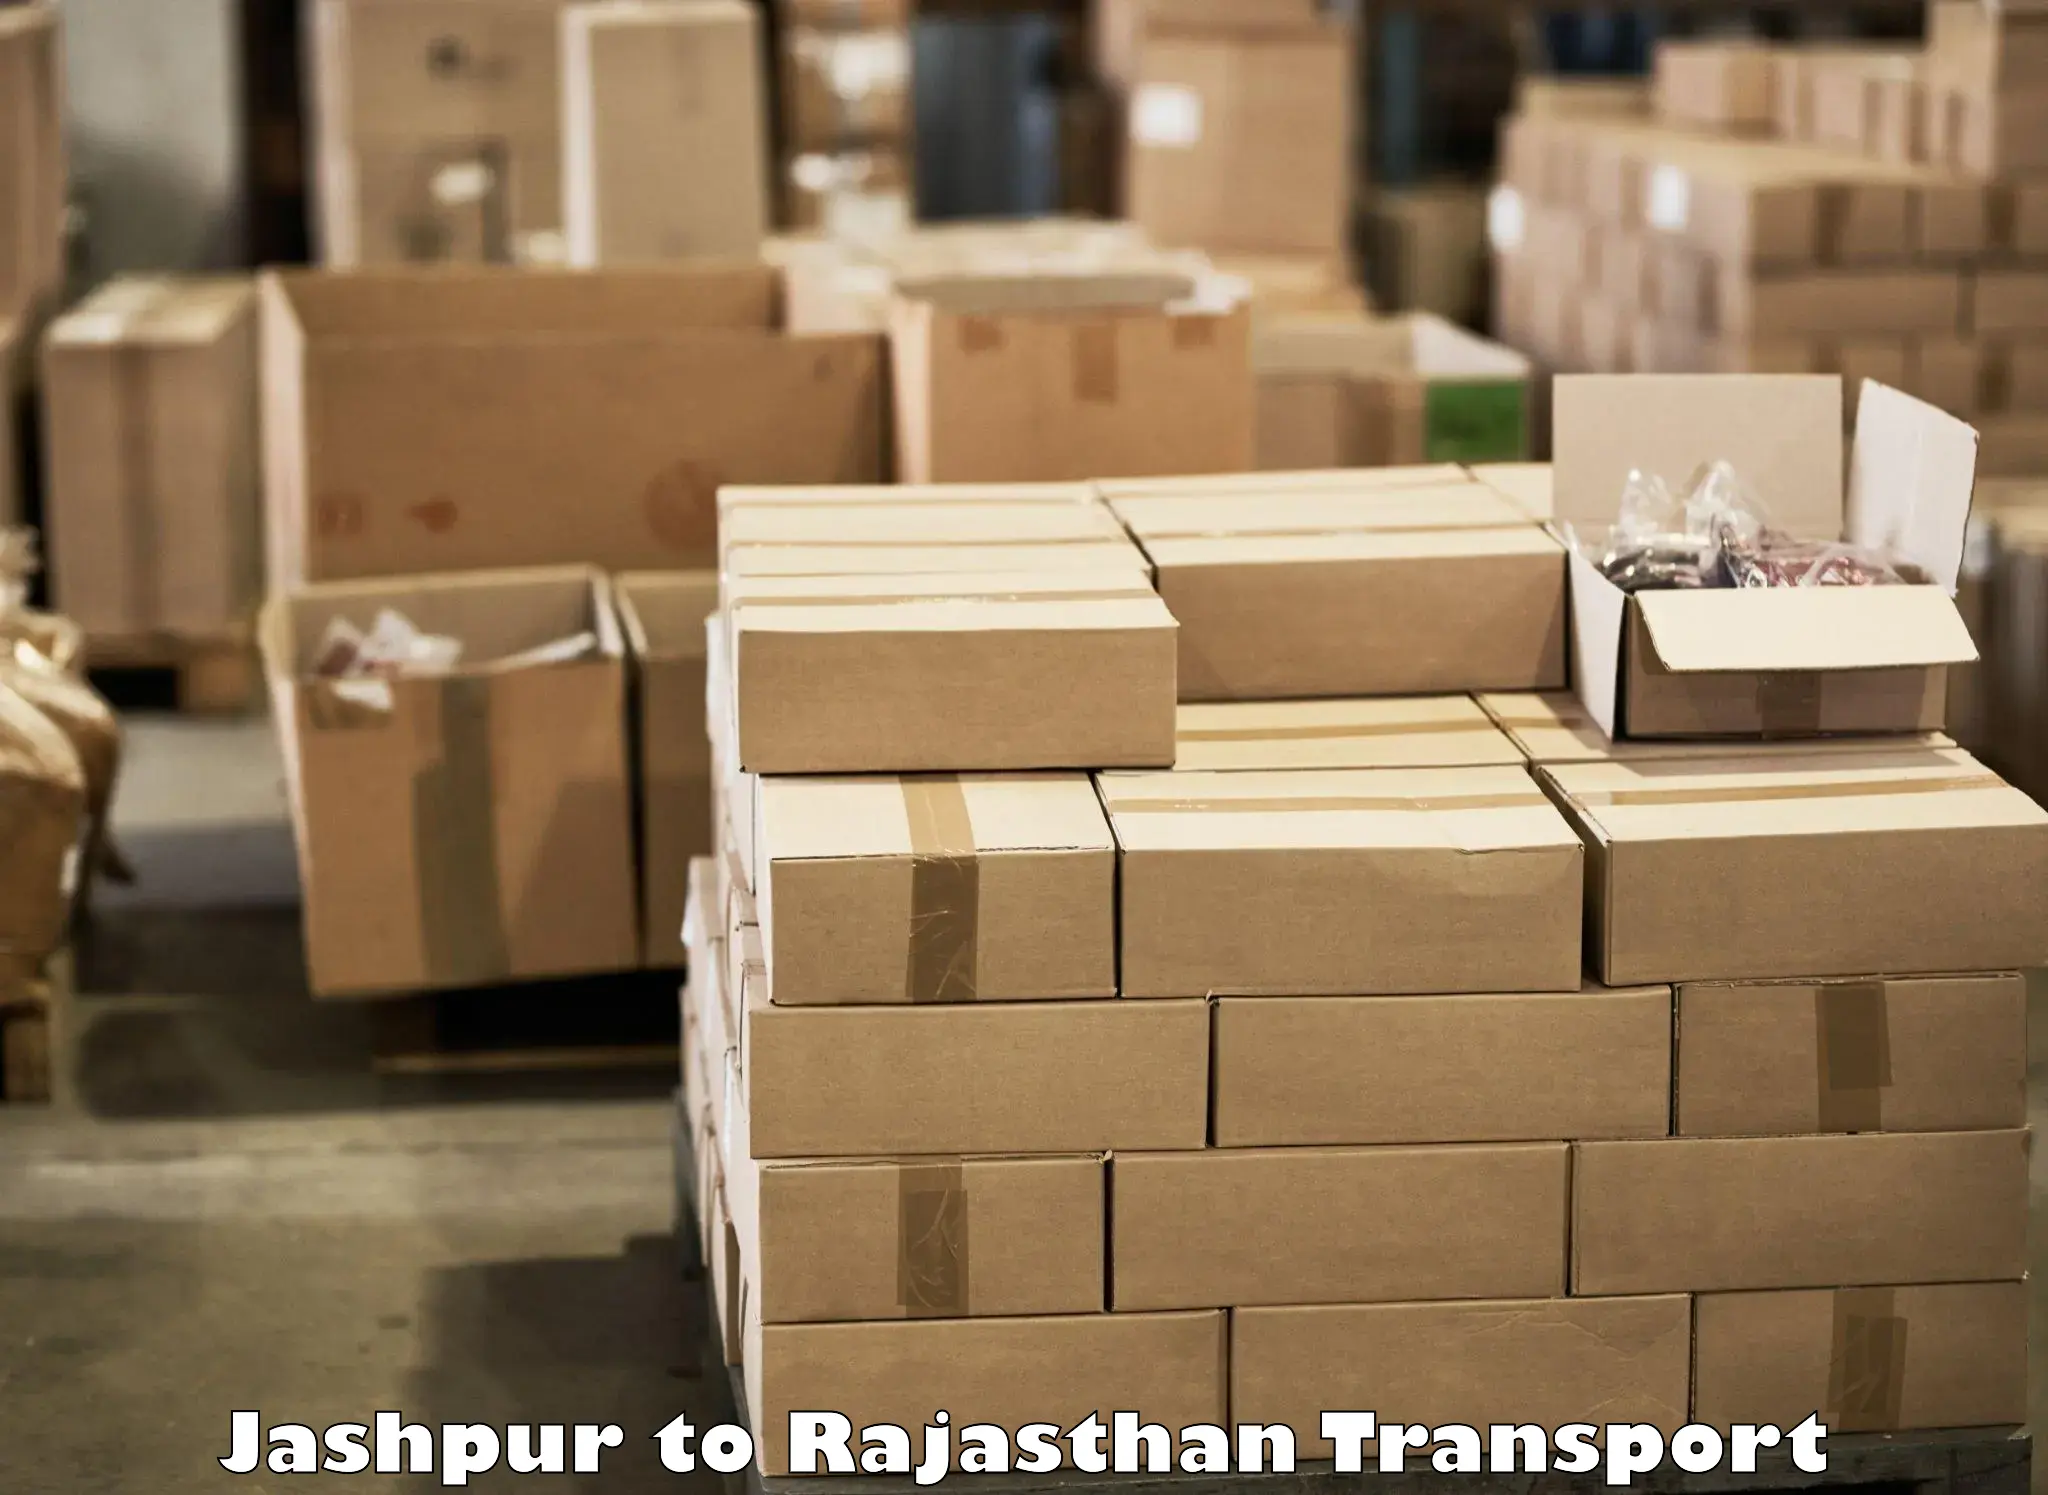 Package delivery services Jashpur to Jaipur